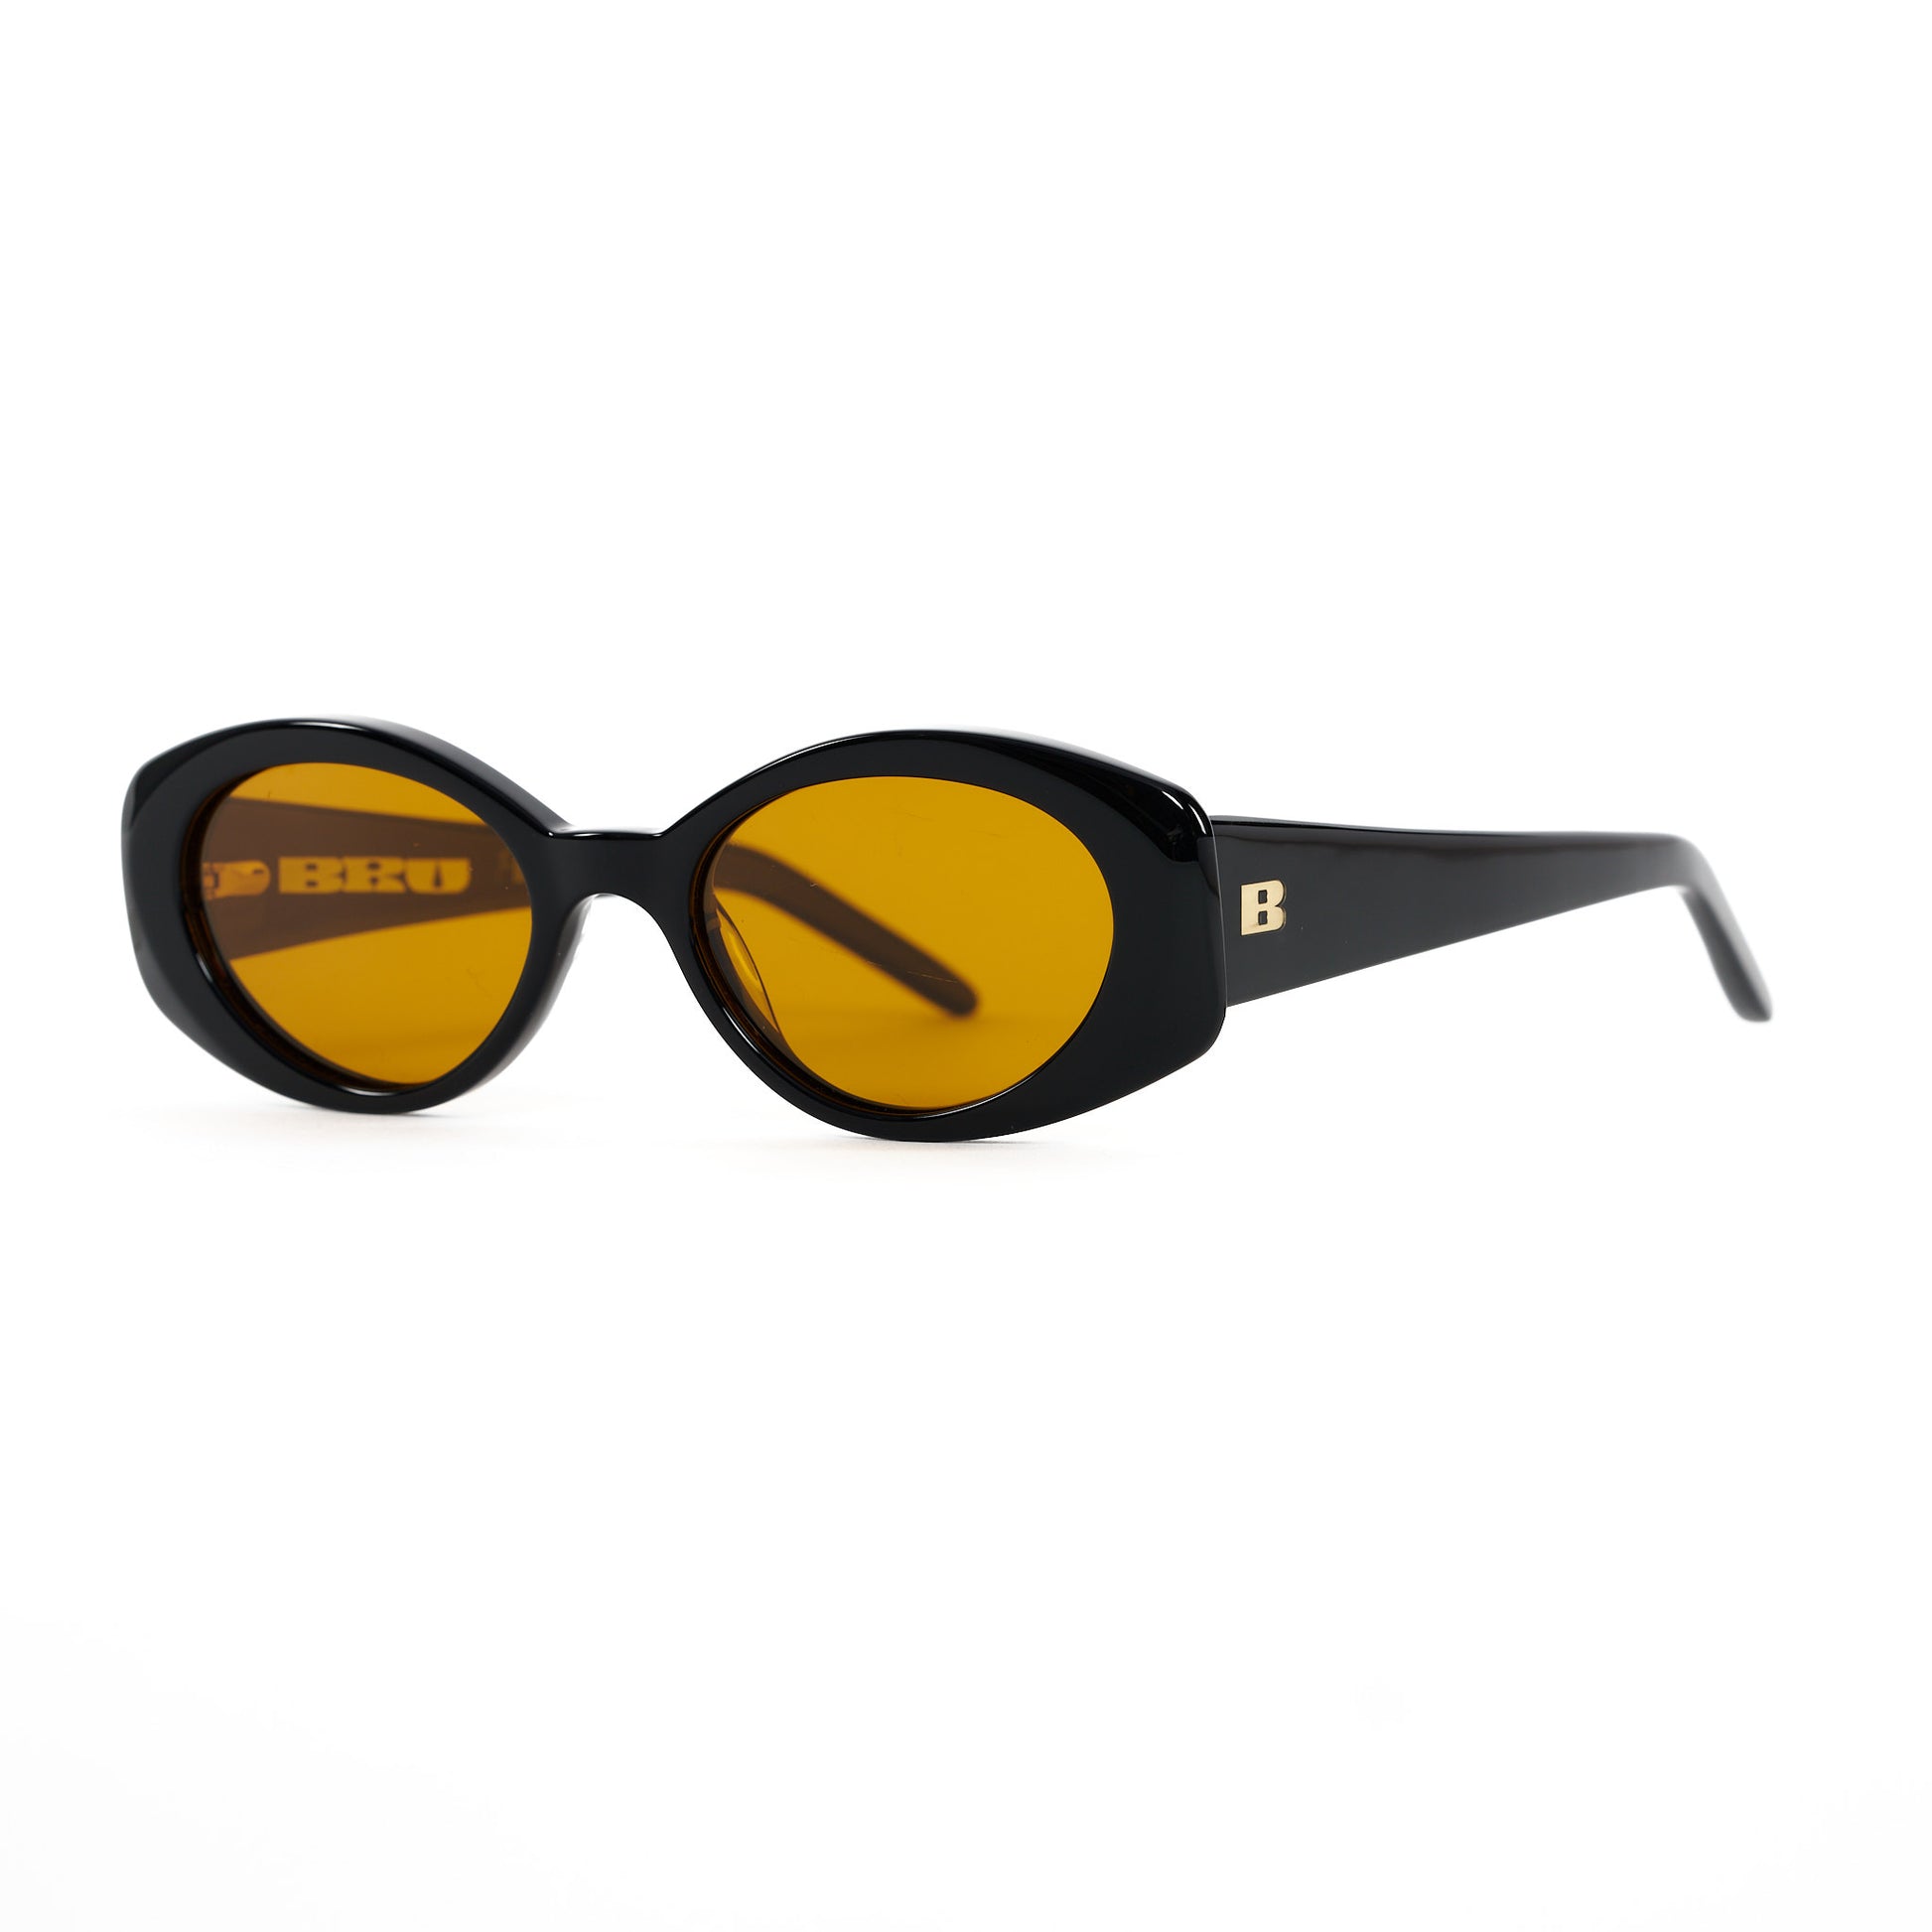 Thick framed oval sunglasses with an orange lens. Acetate Frames and Polarized lenses. 